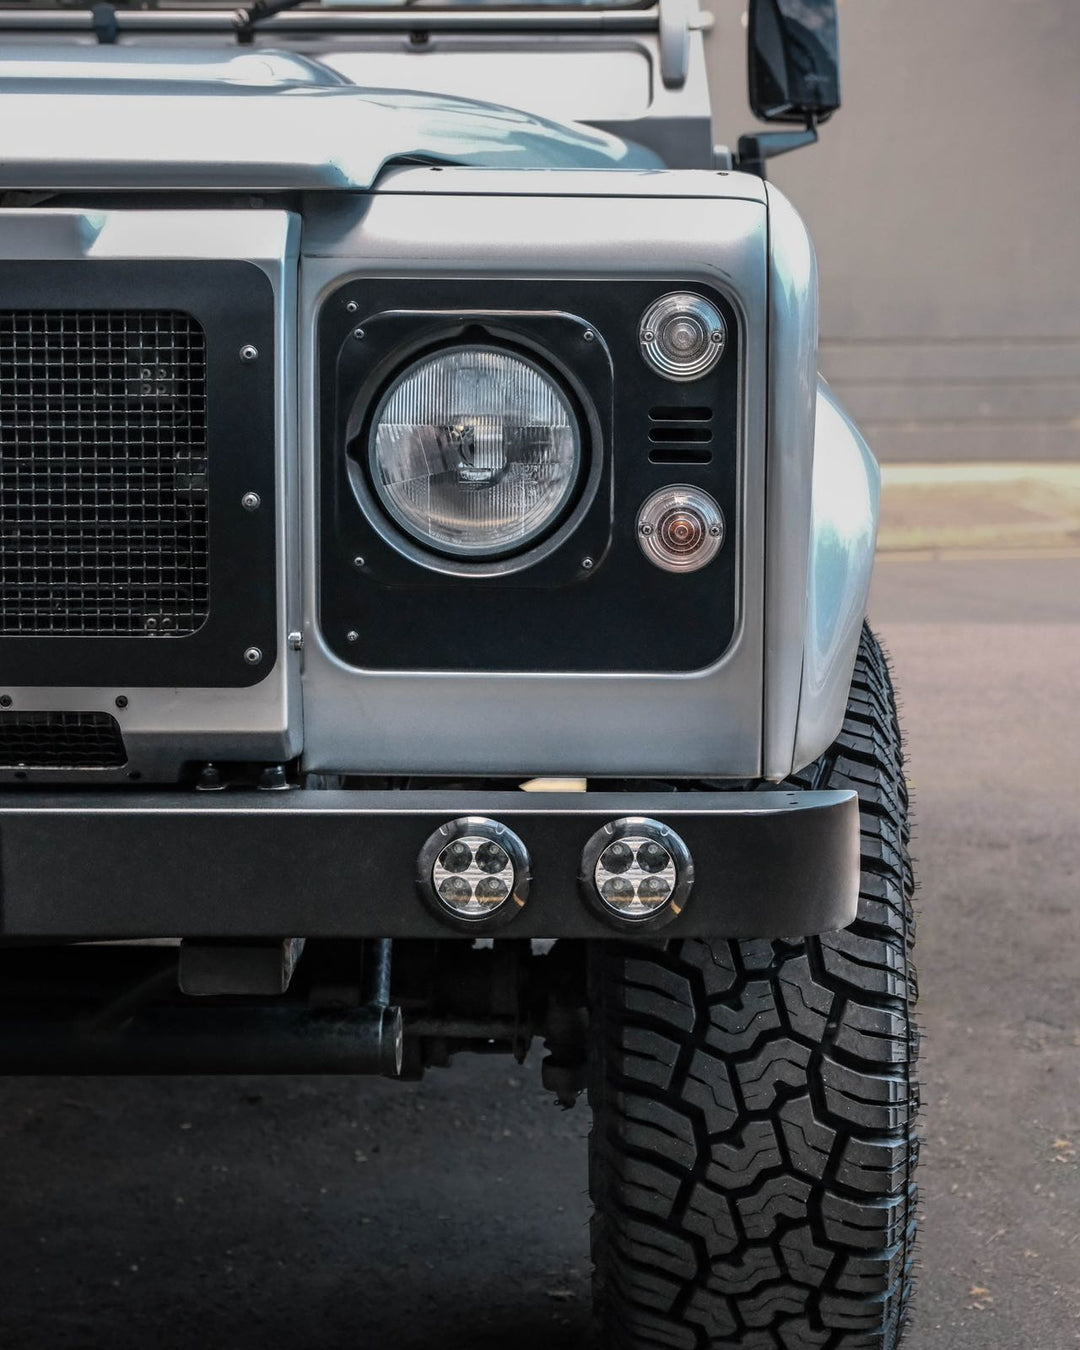 DEFENDER HERITAGE STAINLESS STEEL FRONT GRILLE